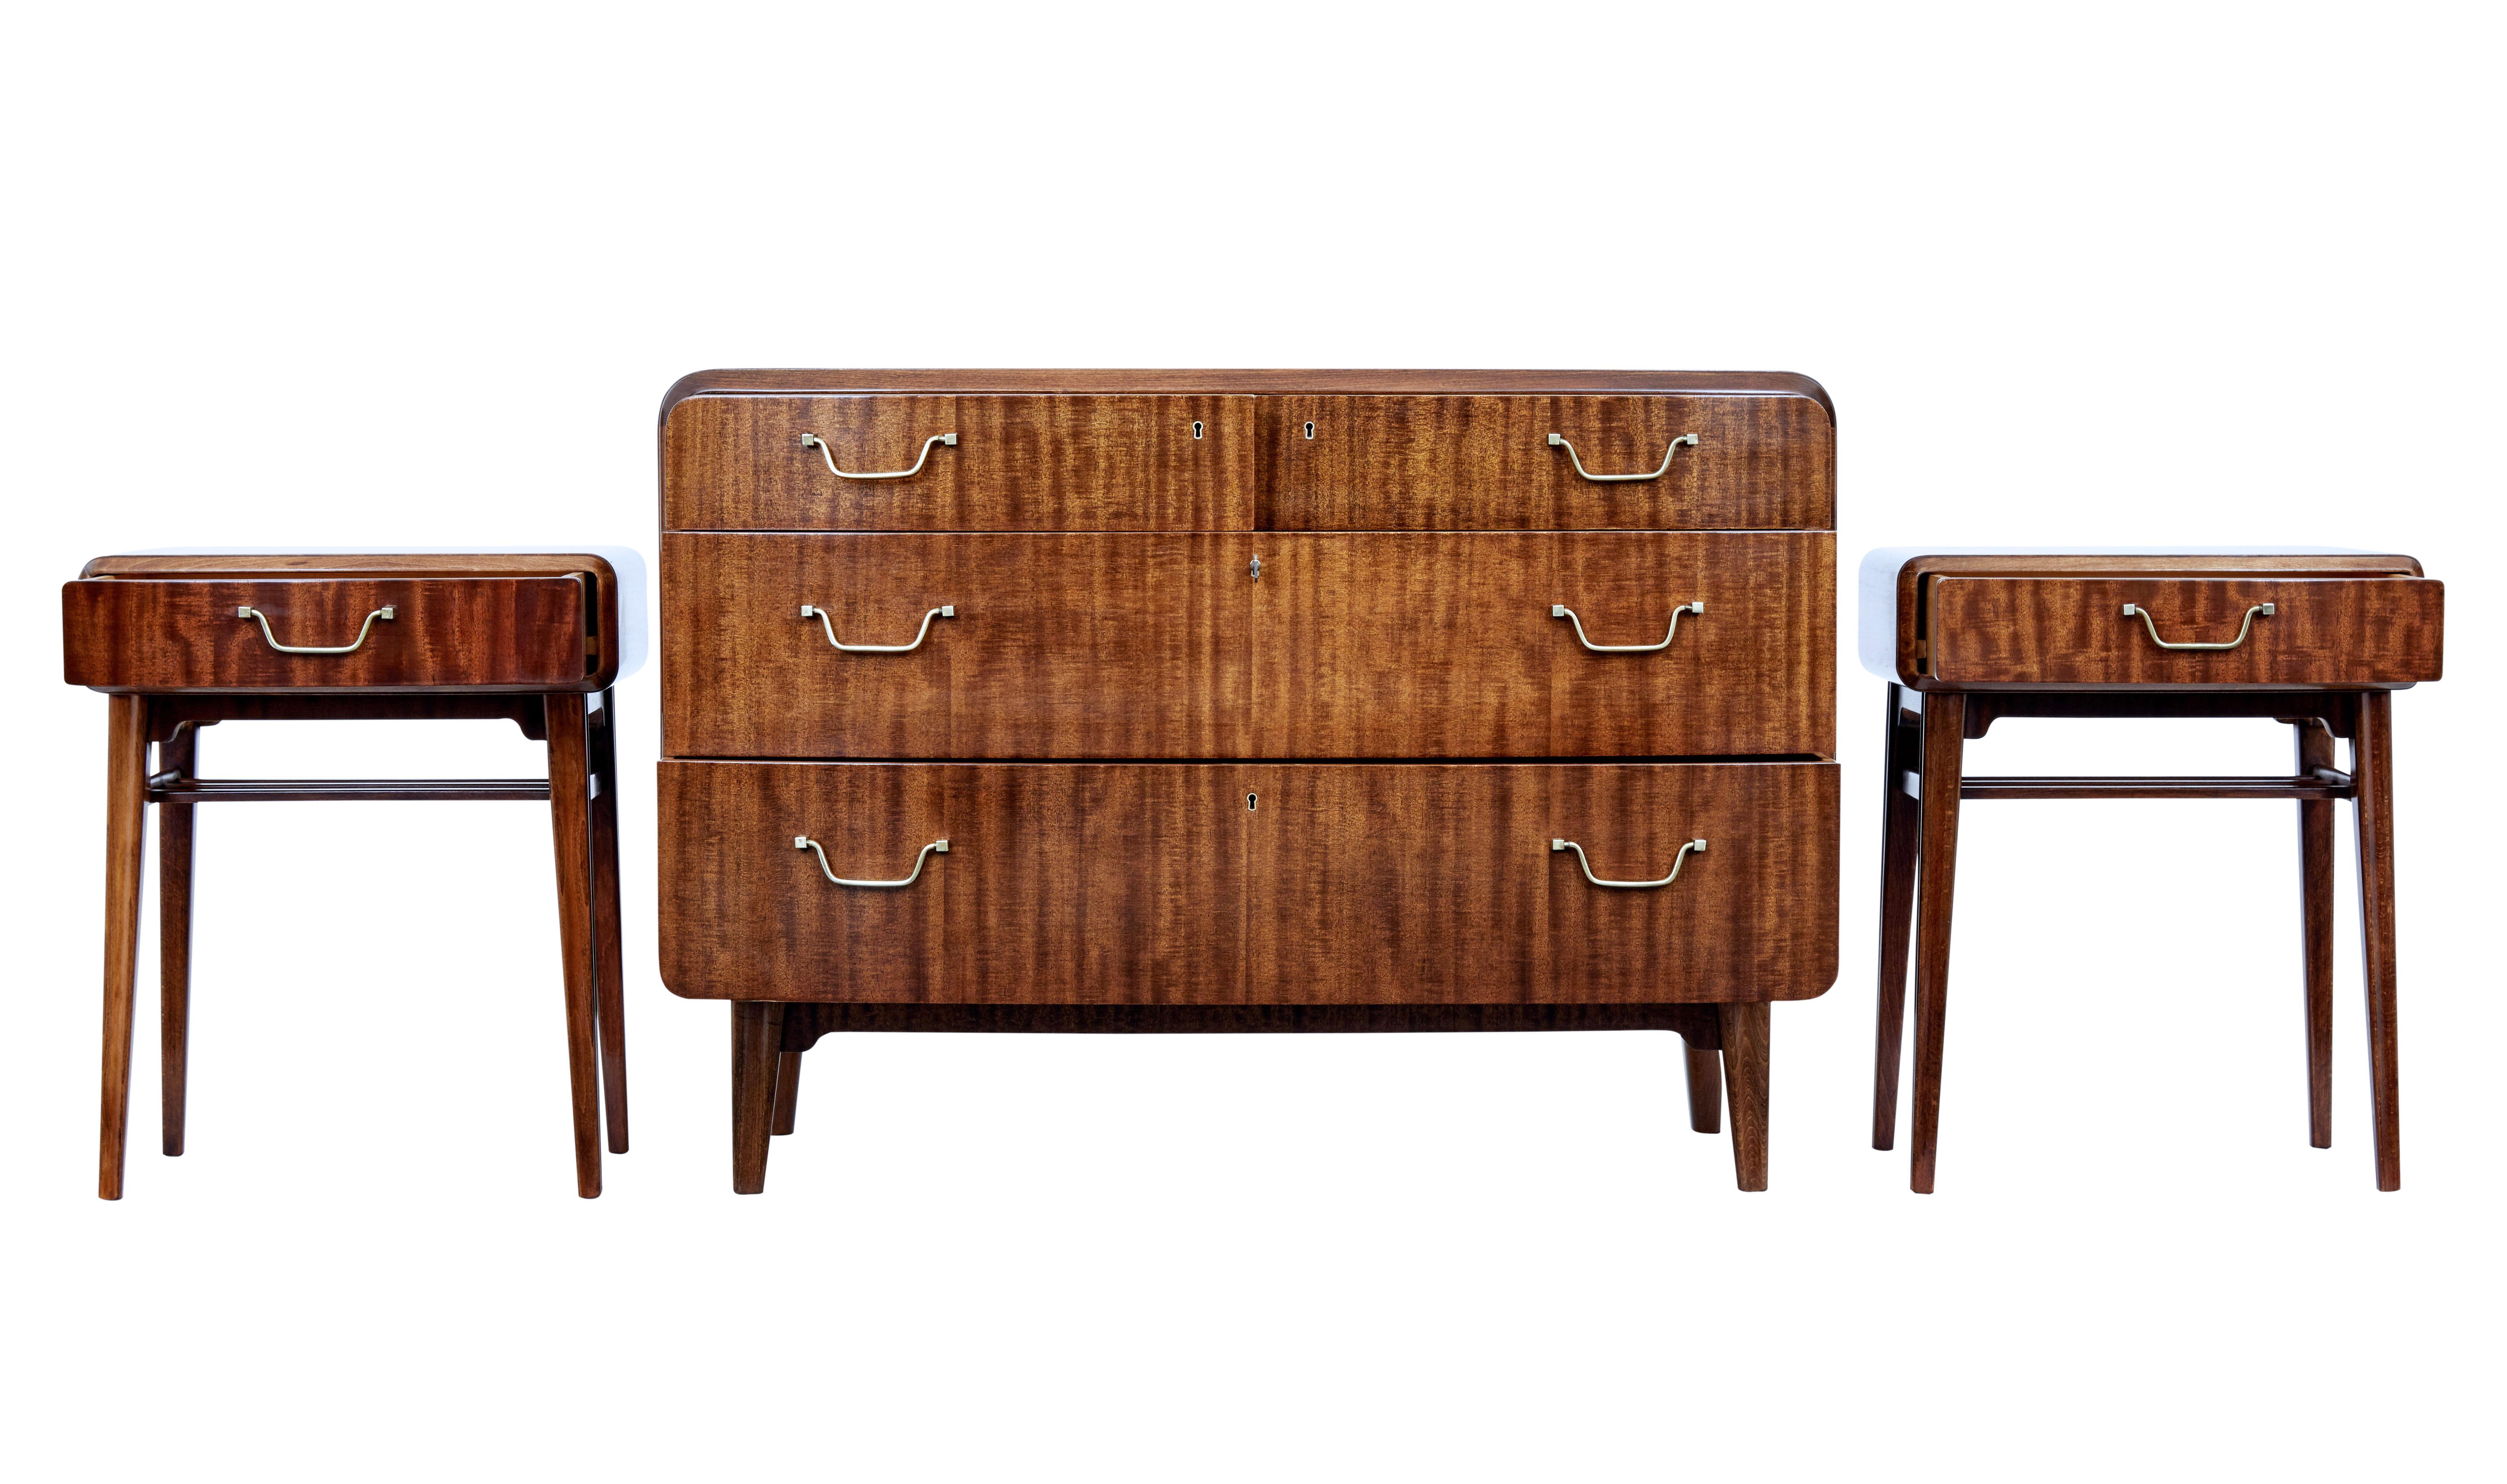 Mid-20th century mahogany 3-piece bedroom suite by SMF Bodafors, circa 1950.

Stunning set comprising of a chest of drawers and a pair of bedside tables, designed by well-known Swedish designer Axel Larsson (1898-1975) for Swedish company